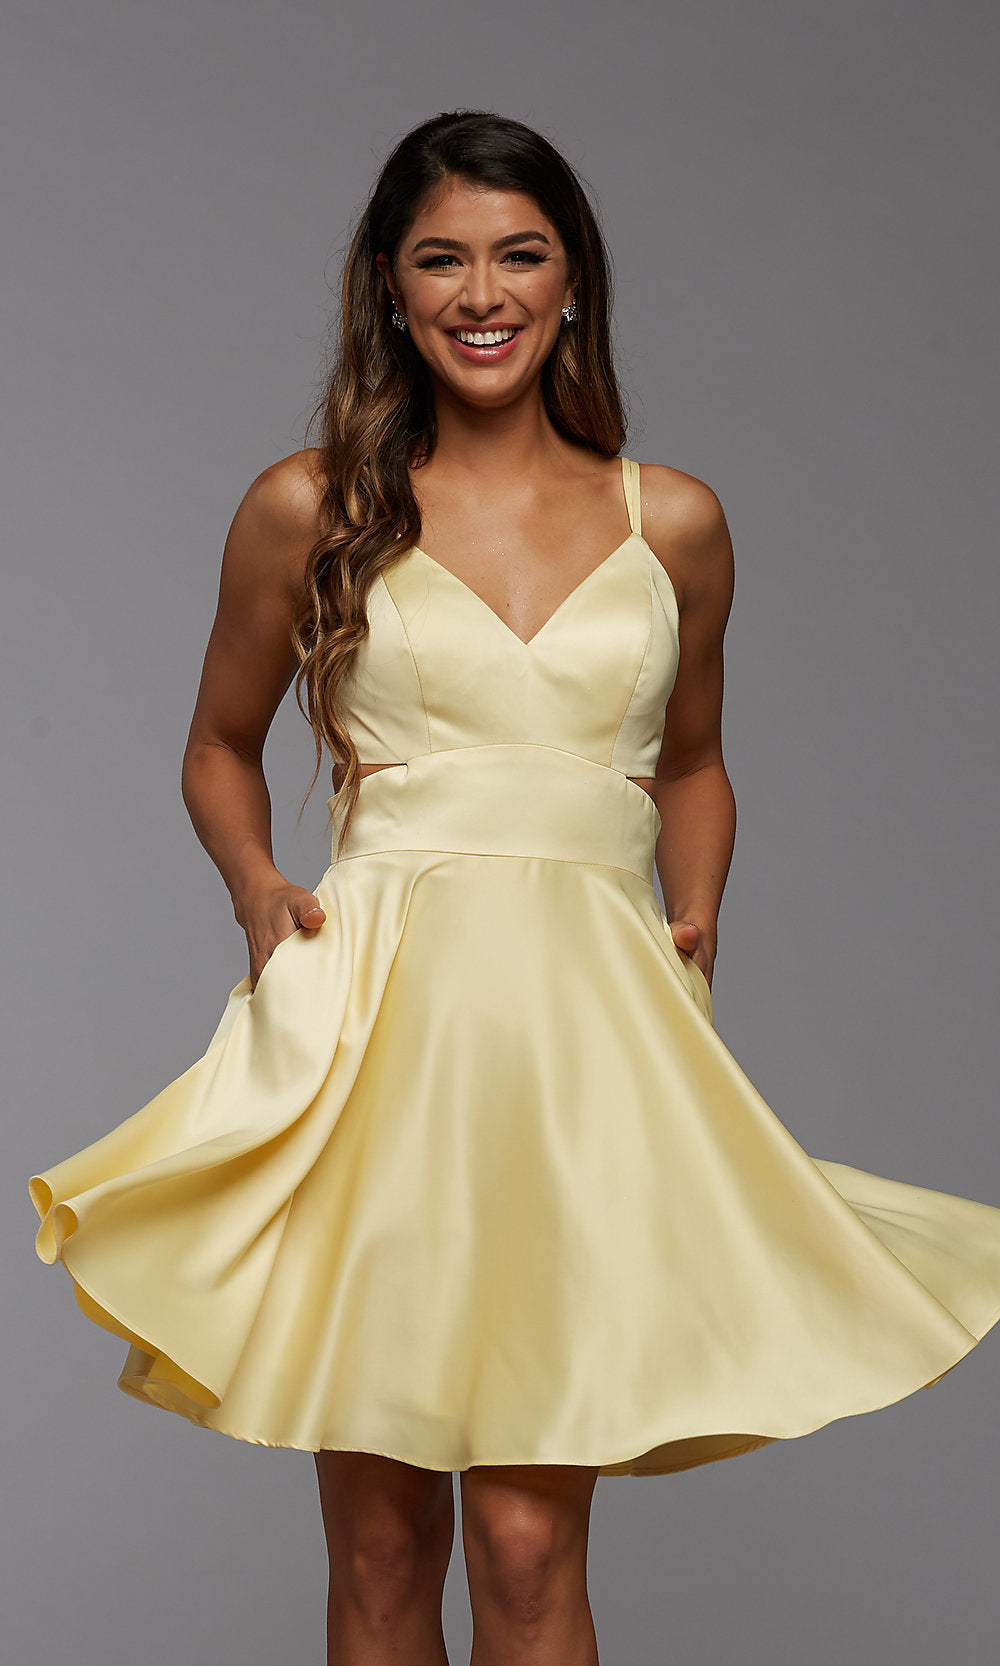 Cute Short Simple Homecoming Dress by PromGirl